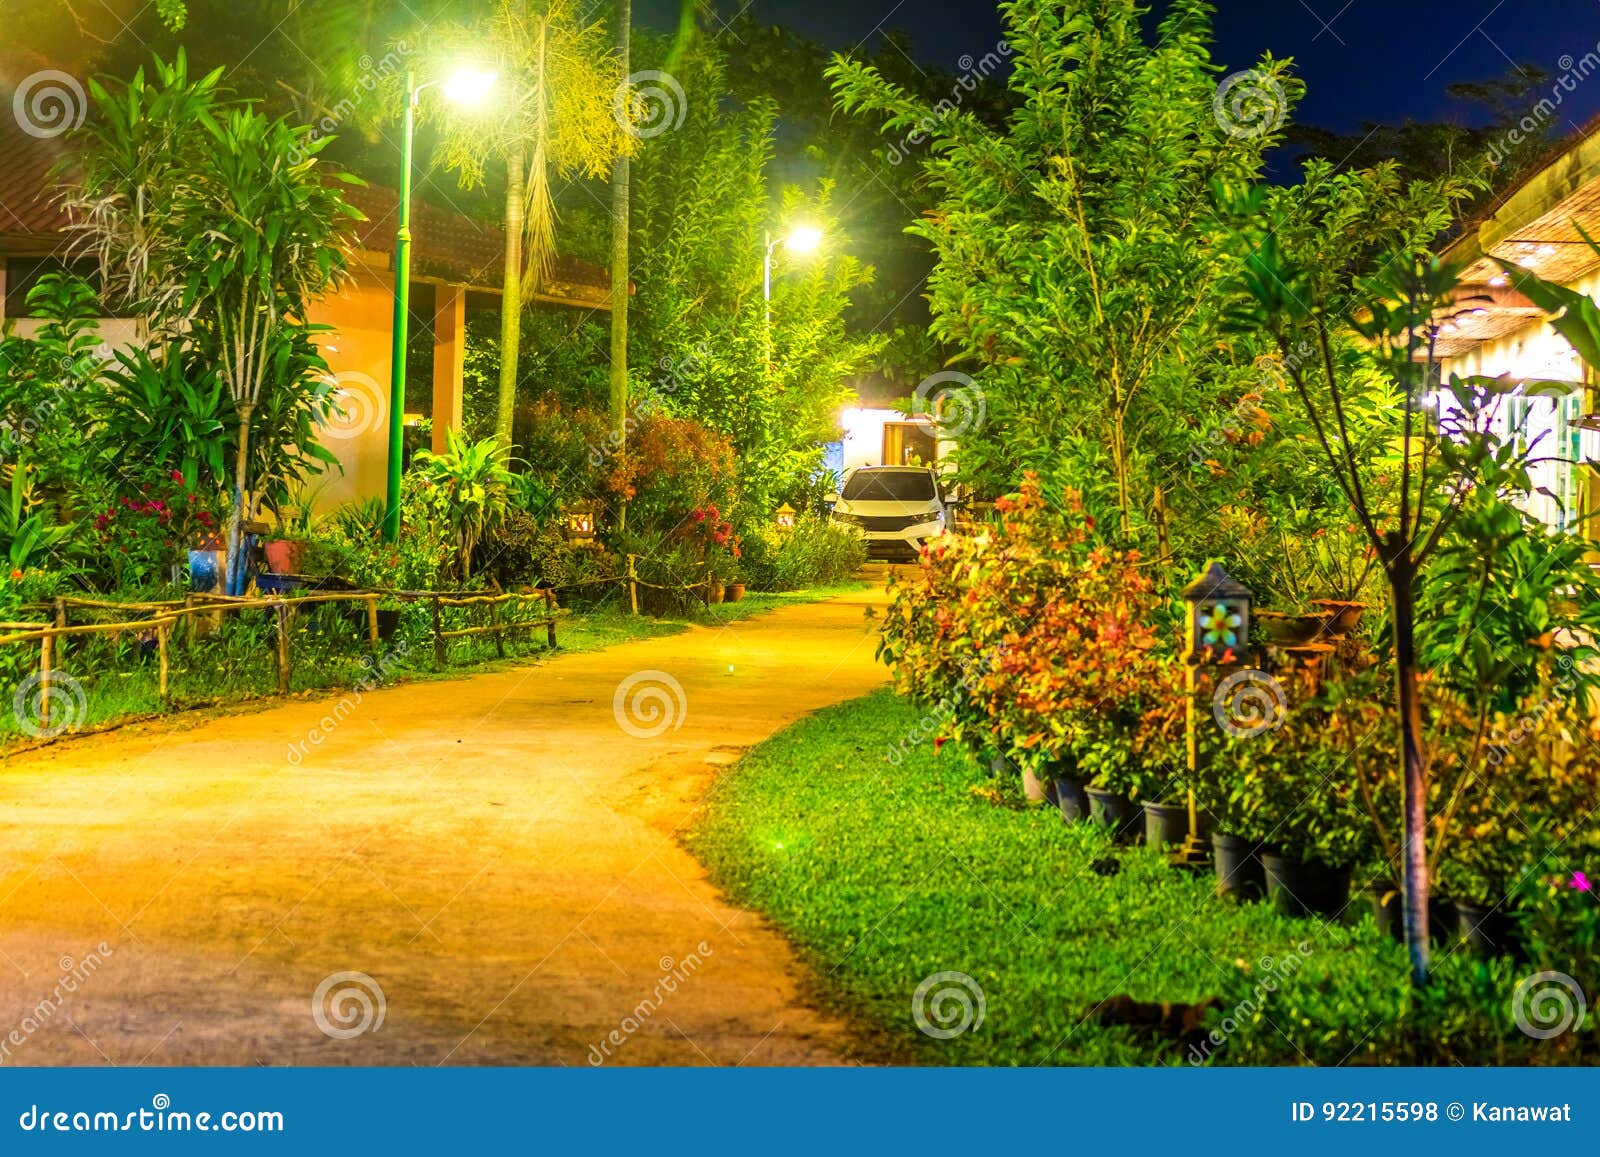 Walkway and Lighting in the Night Garden Stock Photo - Image of travel,  lighted: 92215598